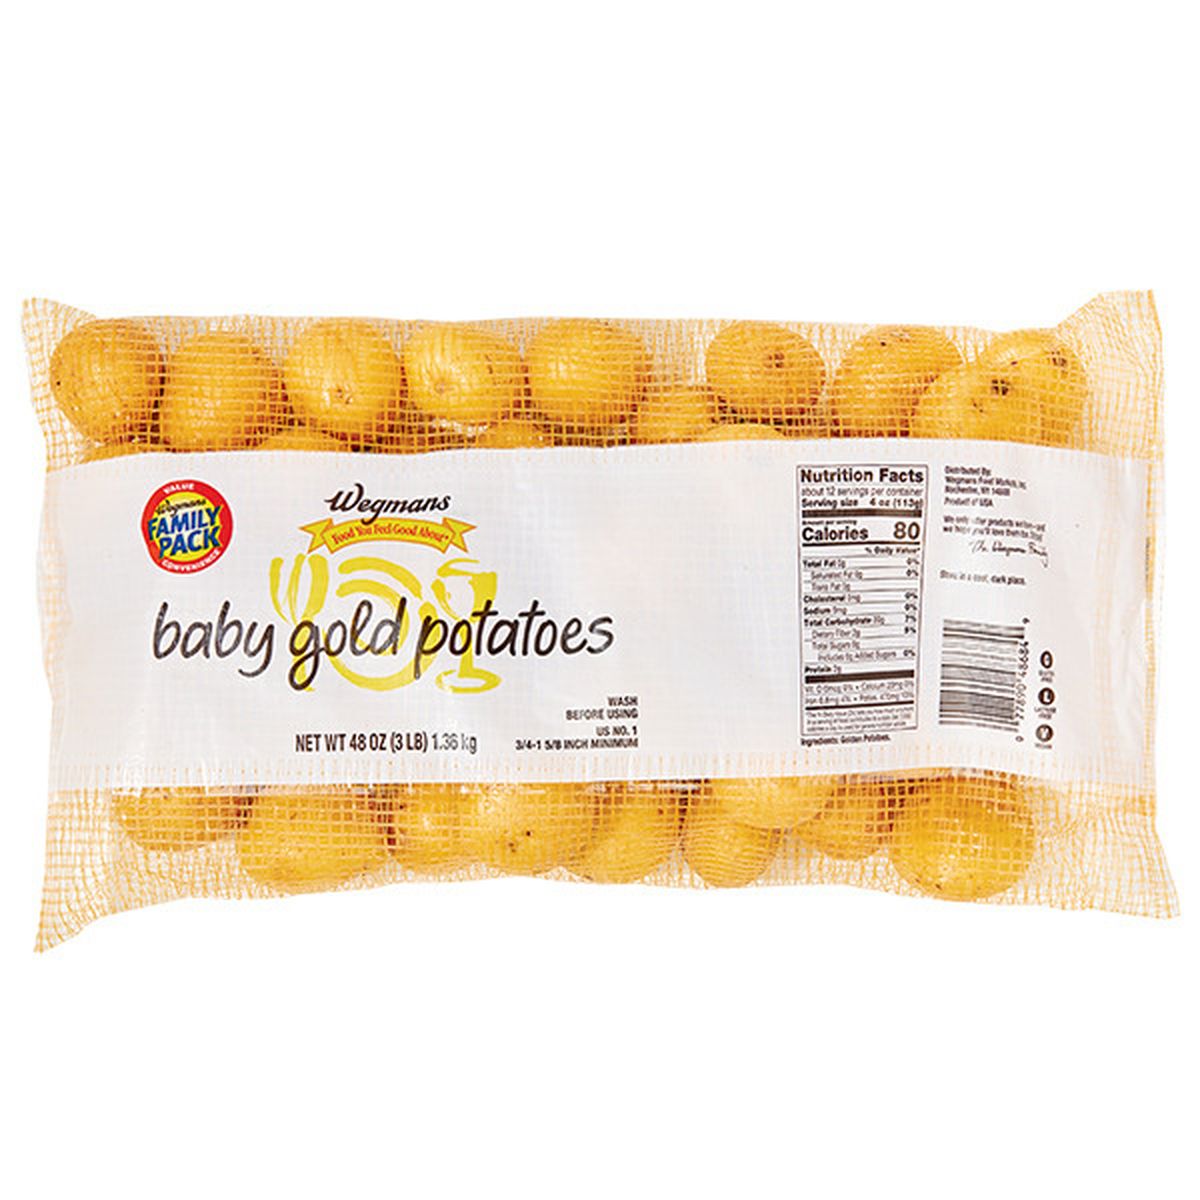 Calories in Baby Gold Potatoes, FAMILY PACK